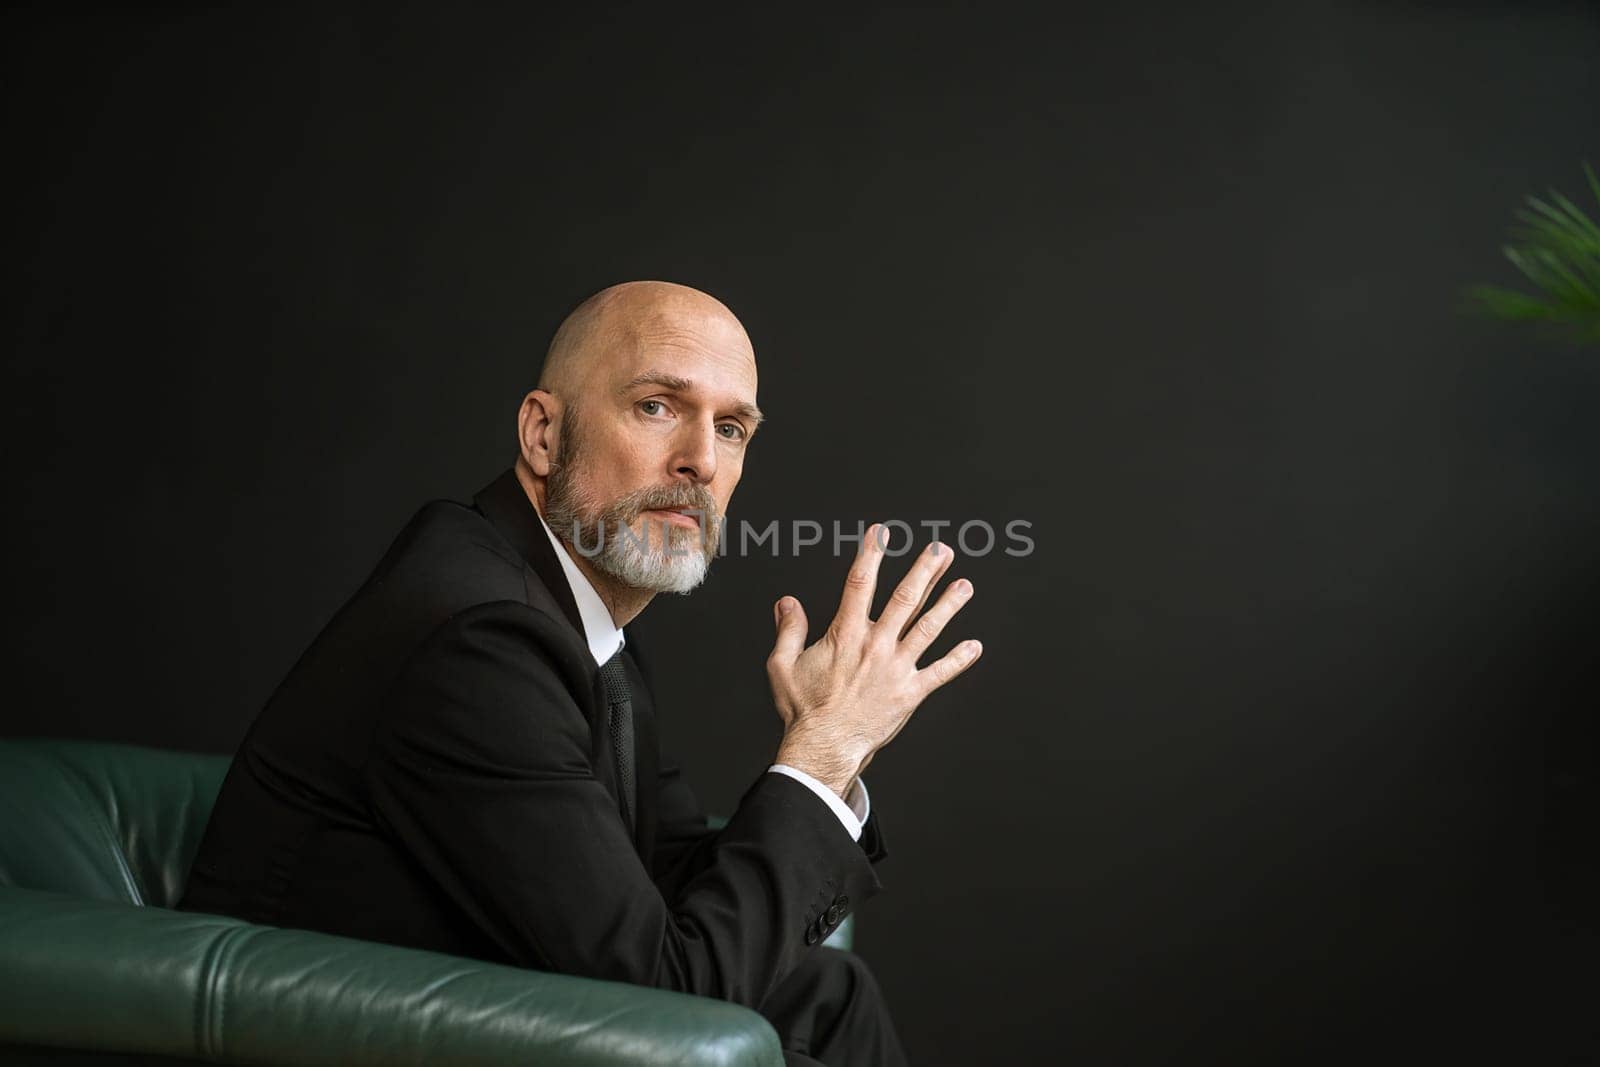 Solid and experienced elderly businessman with gray beard, he exudes confidence and professionalism. Seated in luxurious leather chair, he holds hands together in composed and thoughtful manner. by LipikStockMedia